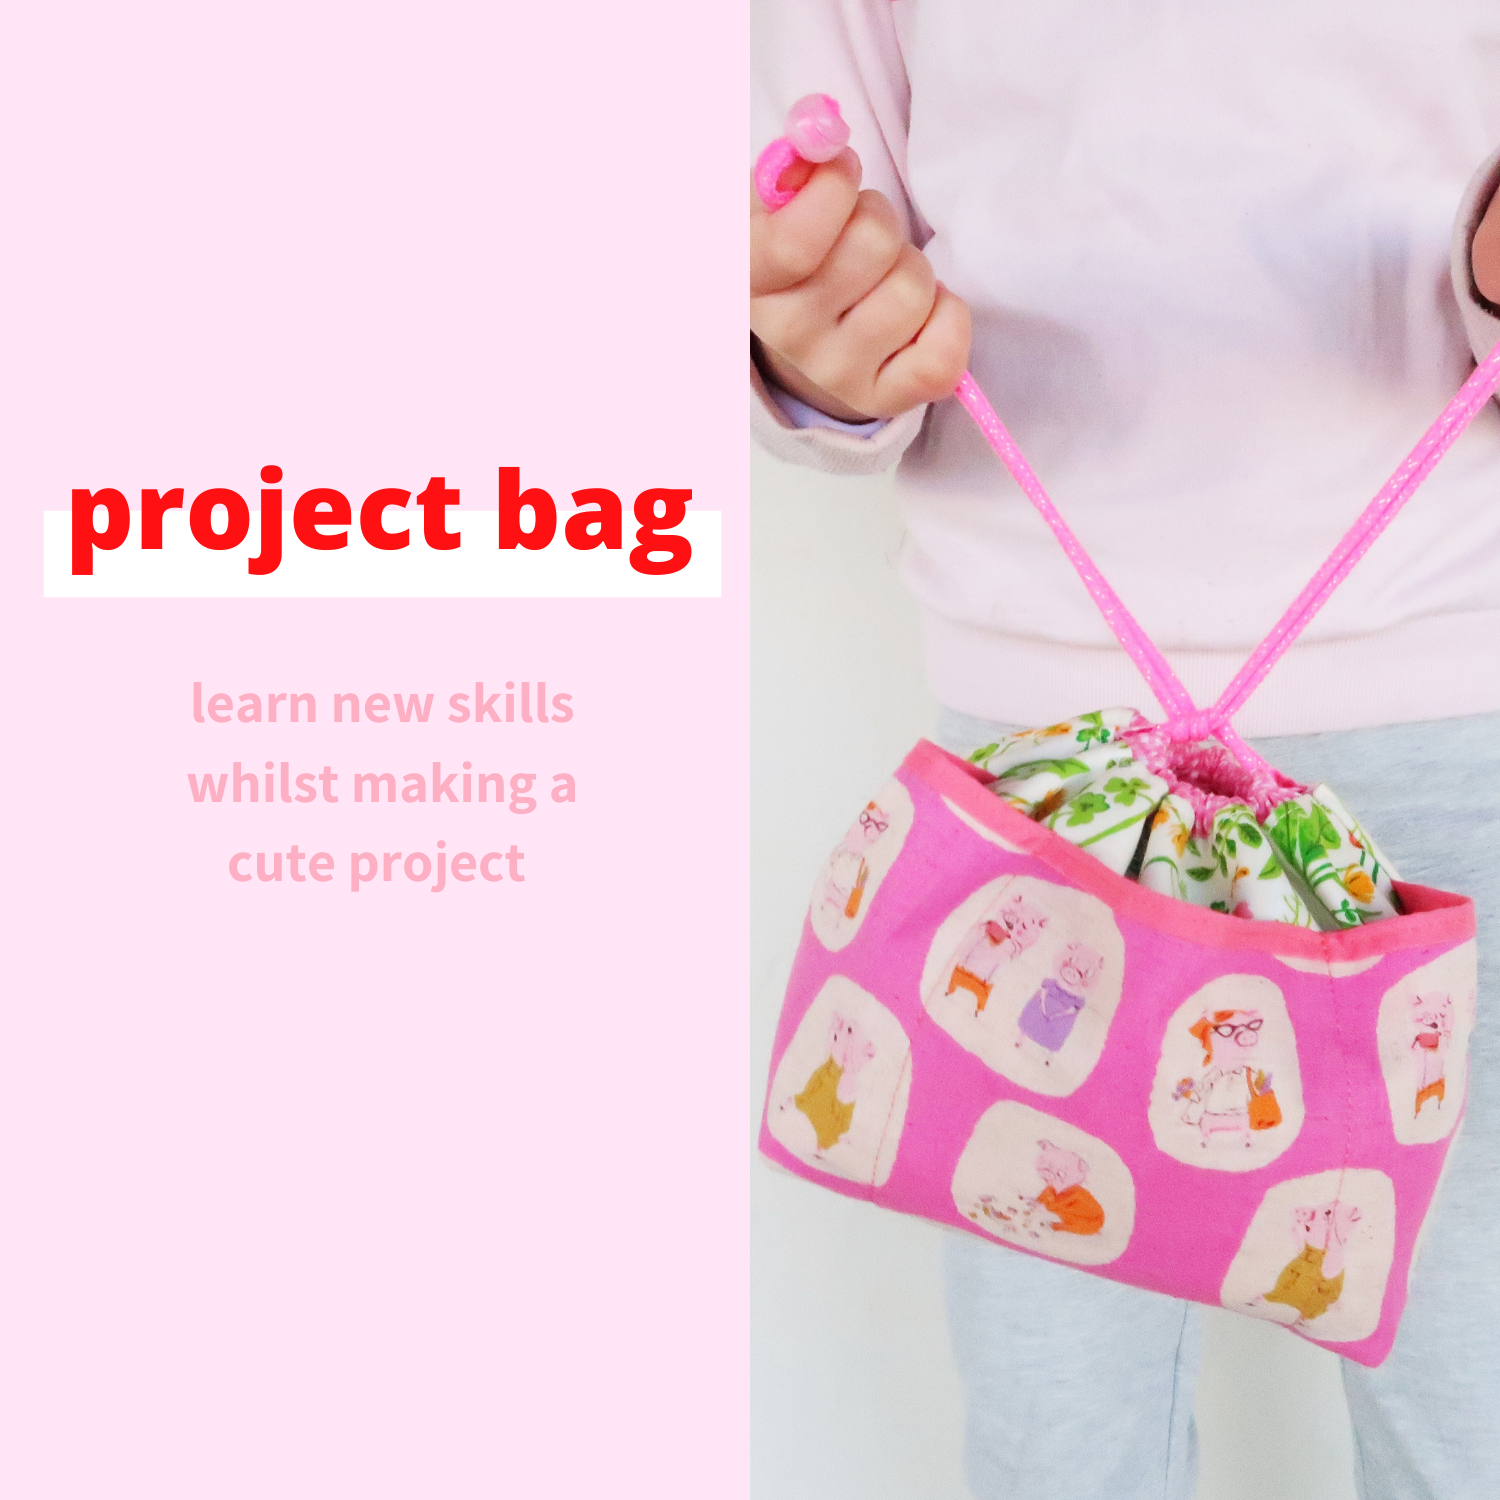 Sweet Cinnamon Roses - on demand sewing course, project bag